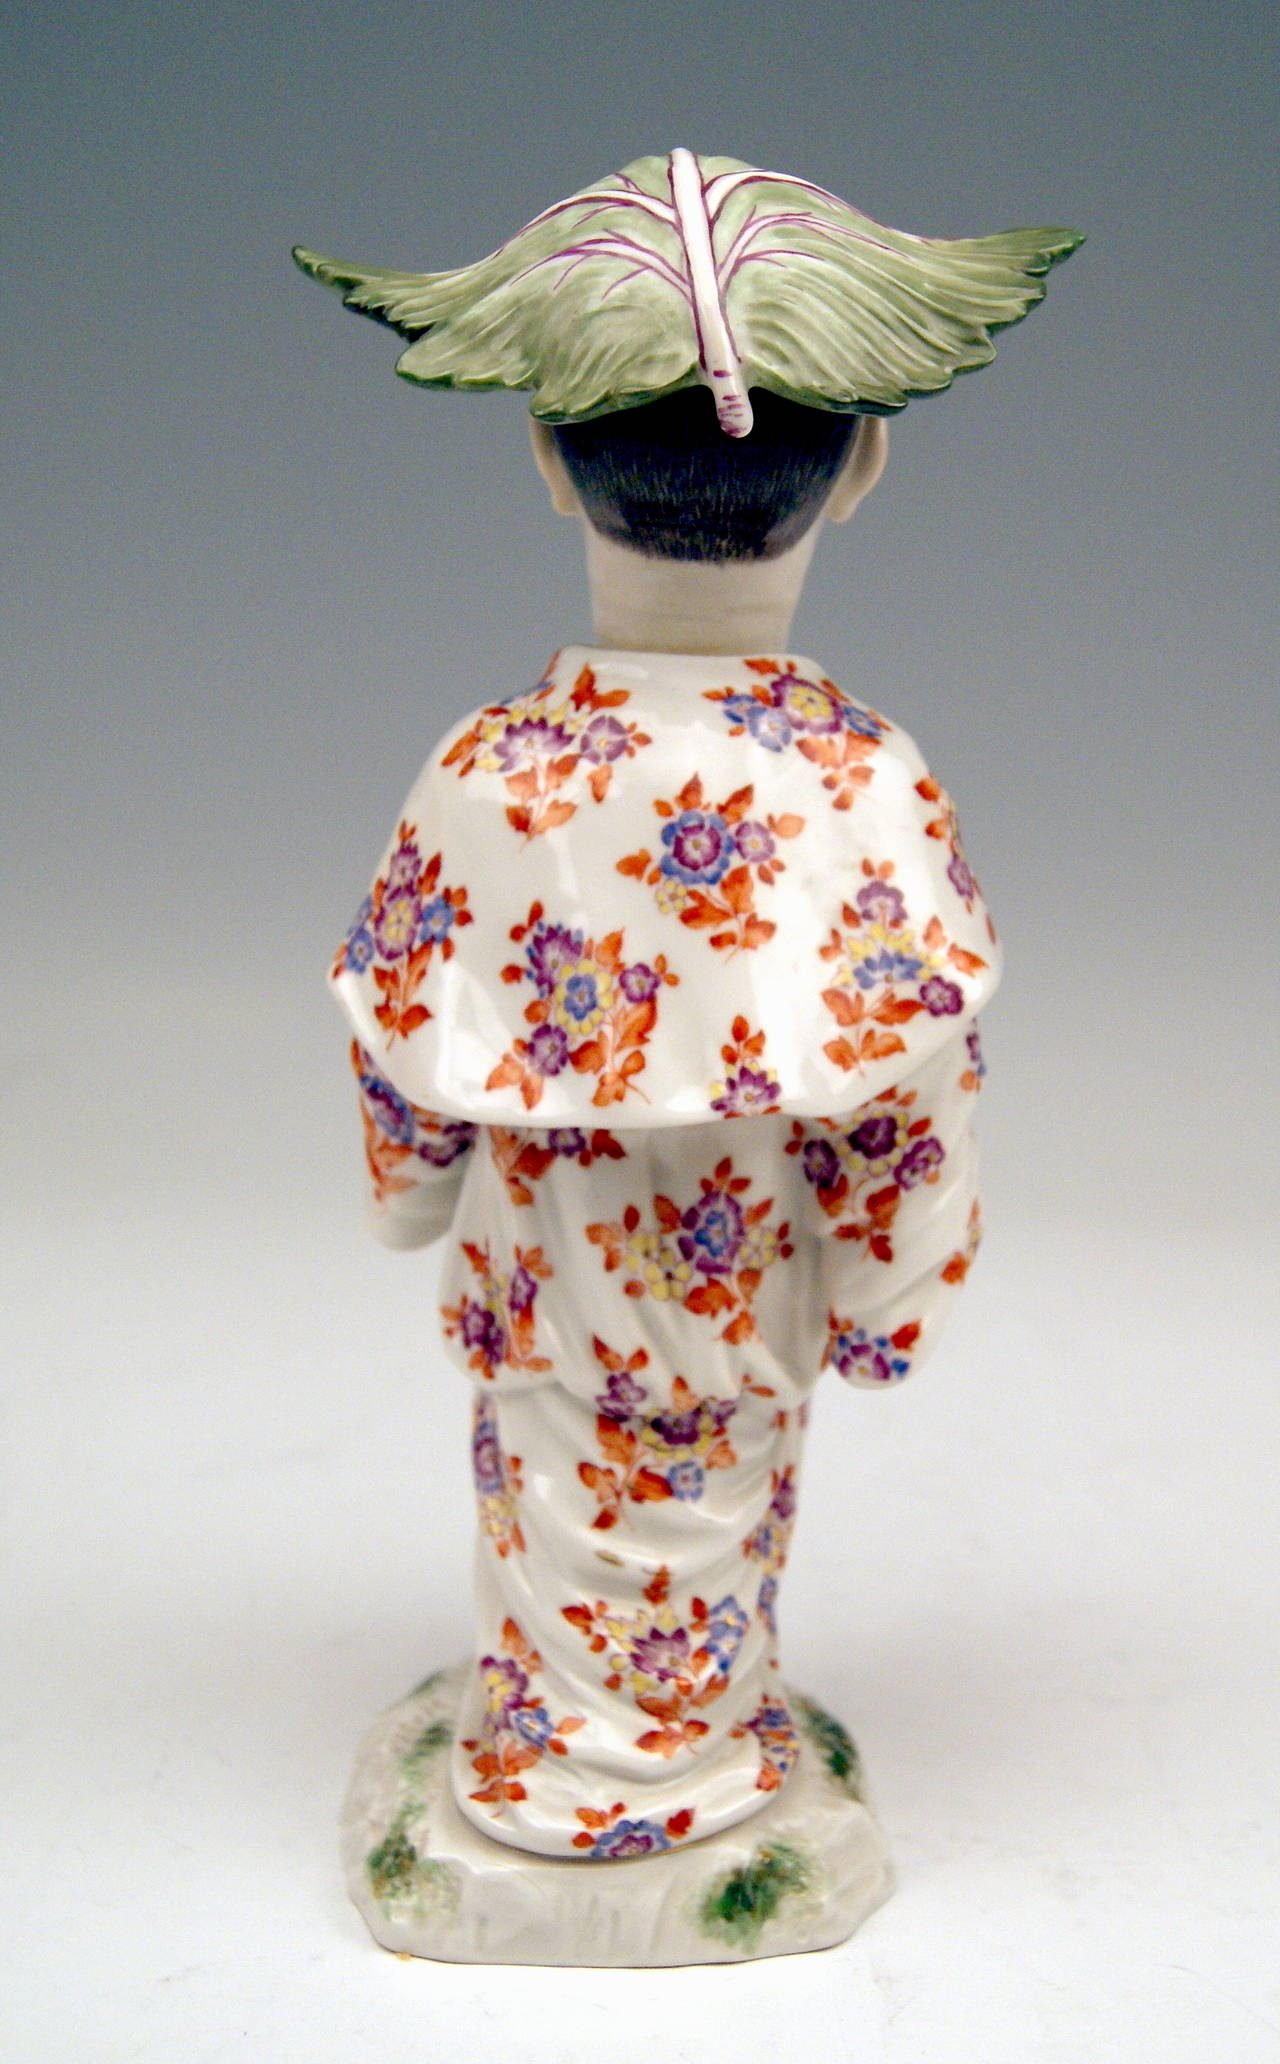 Hand-Painted Meissen Chinese Boy with Hat made of Cabbages' Leaves Kändler made 20th century